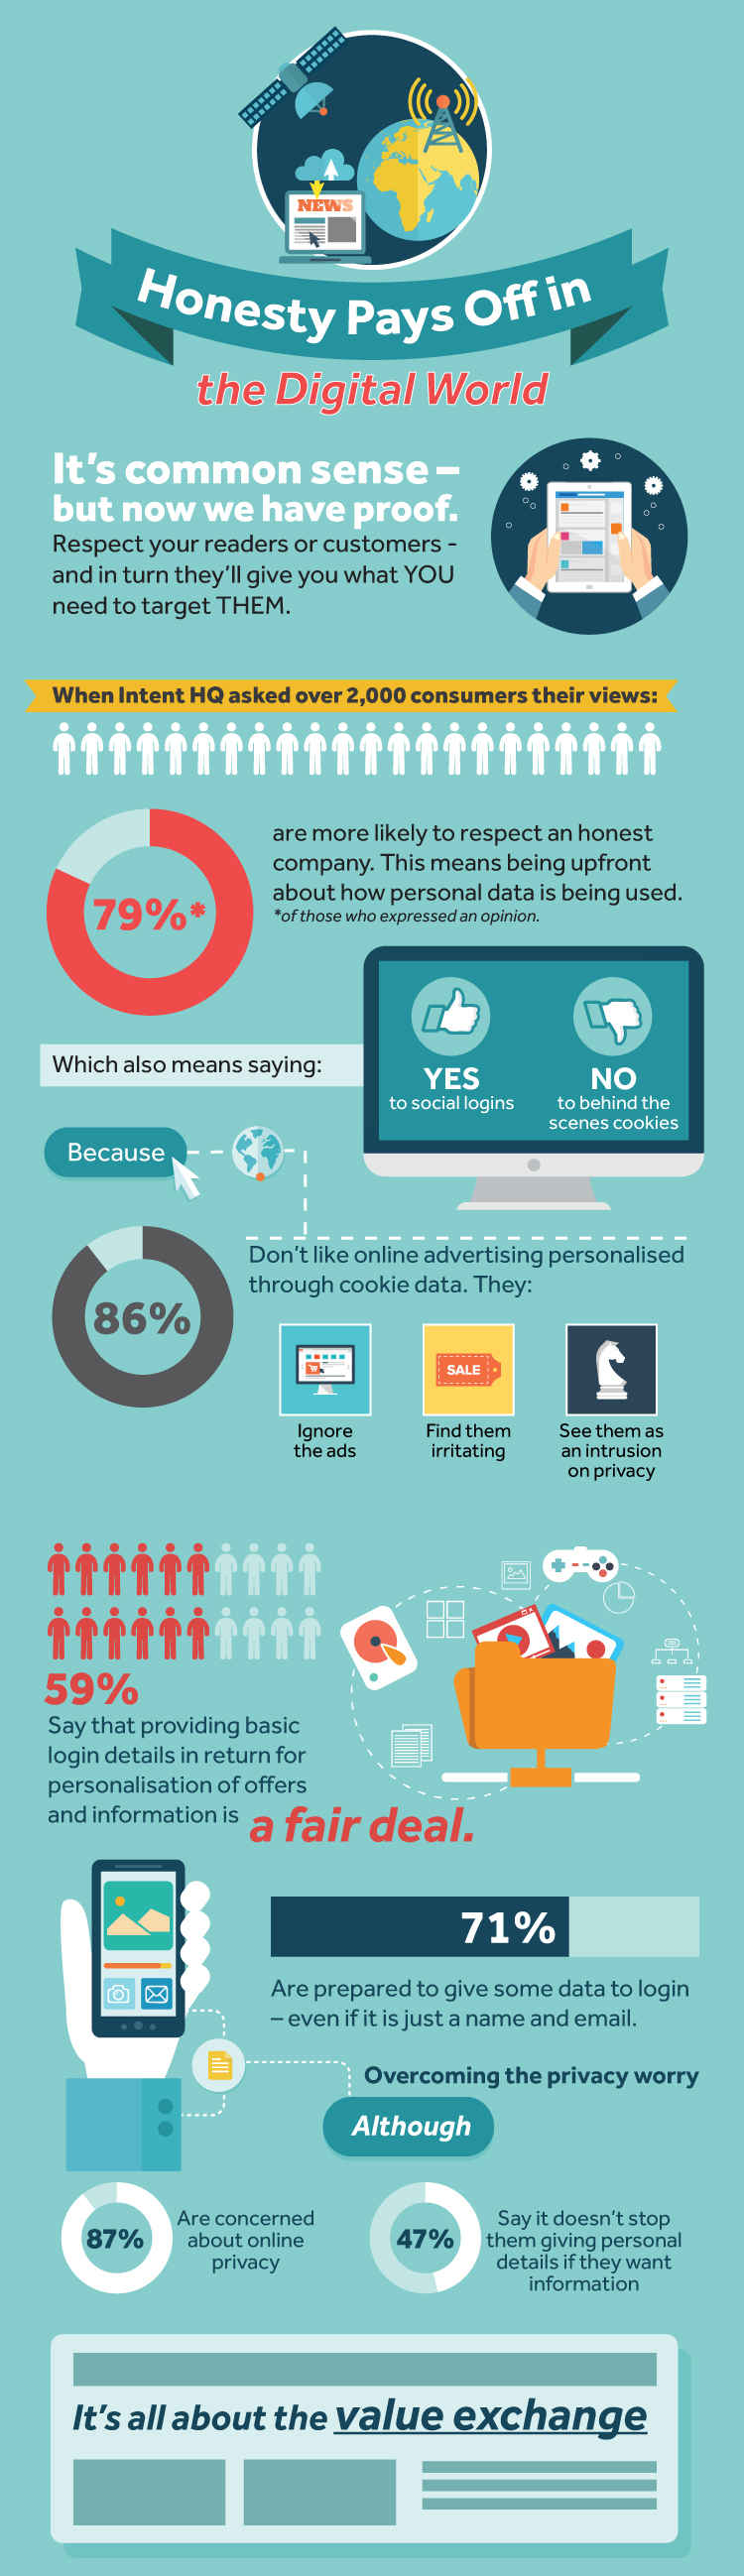 Infographic: 86 Per Cent Dislike Cookie-targeted Ads